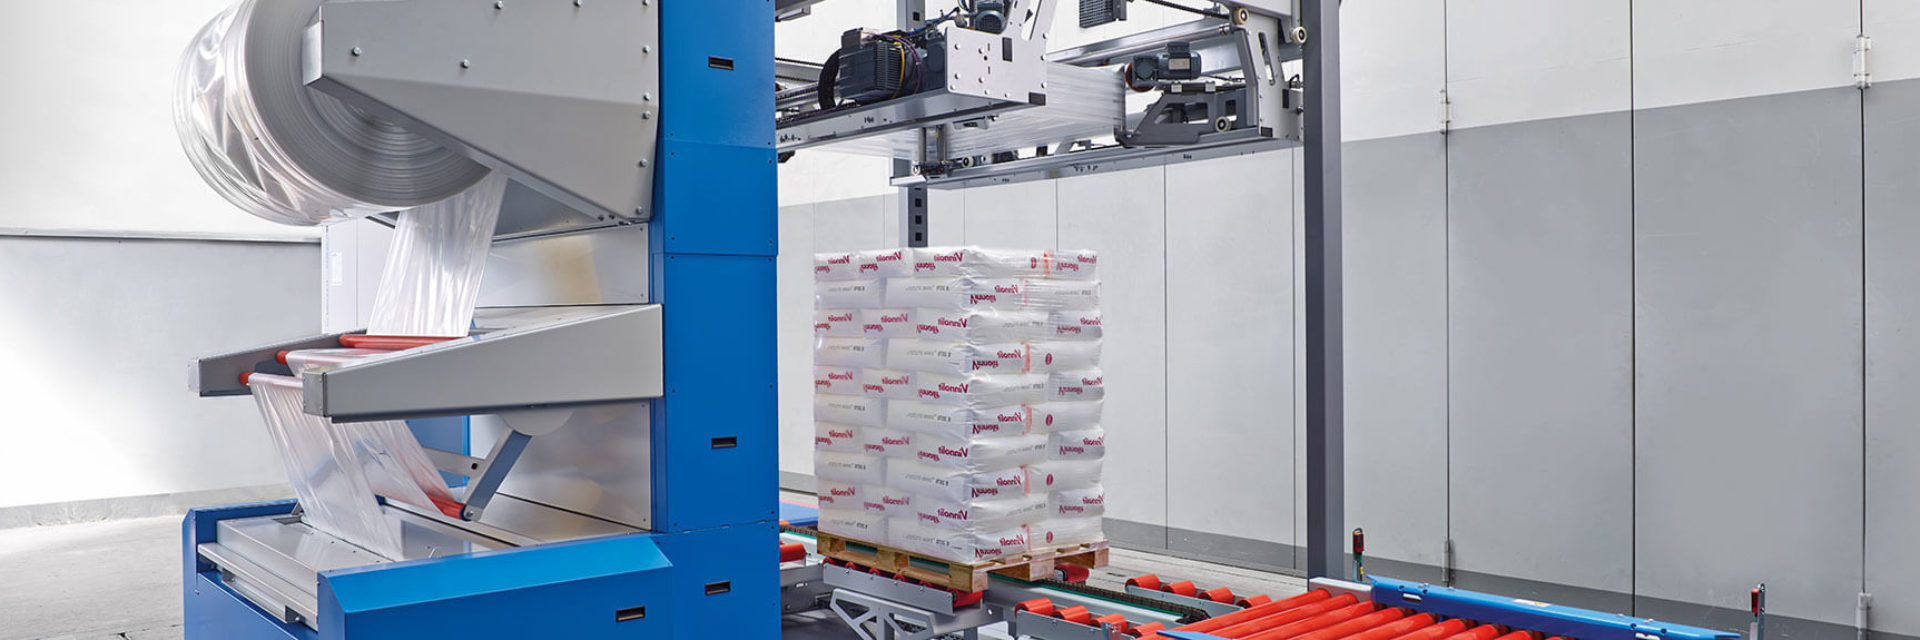 Packaging Solutions for Chemicals - BEUMER Group